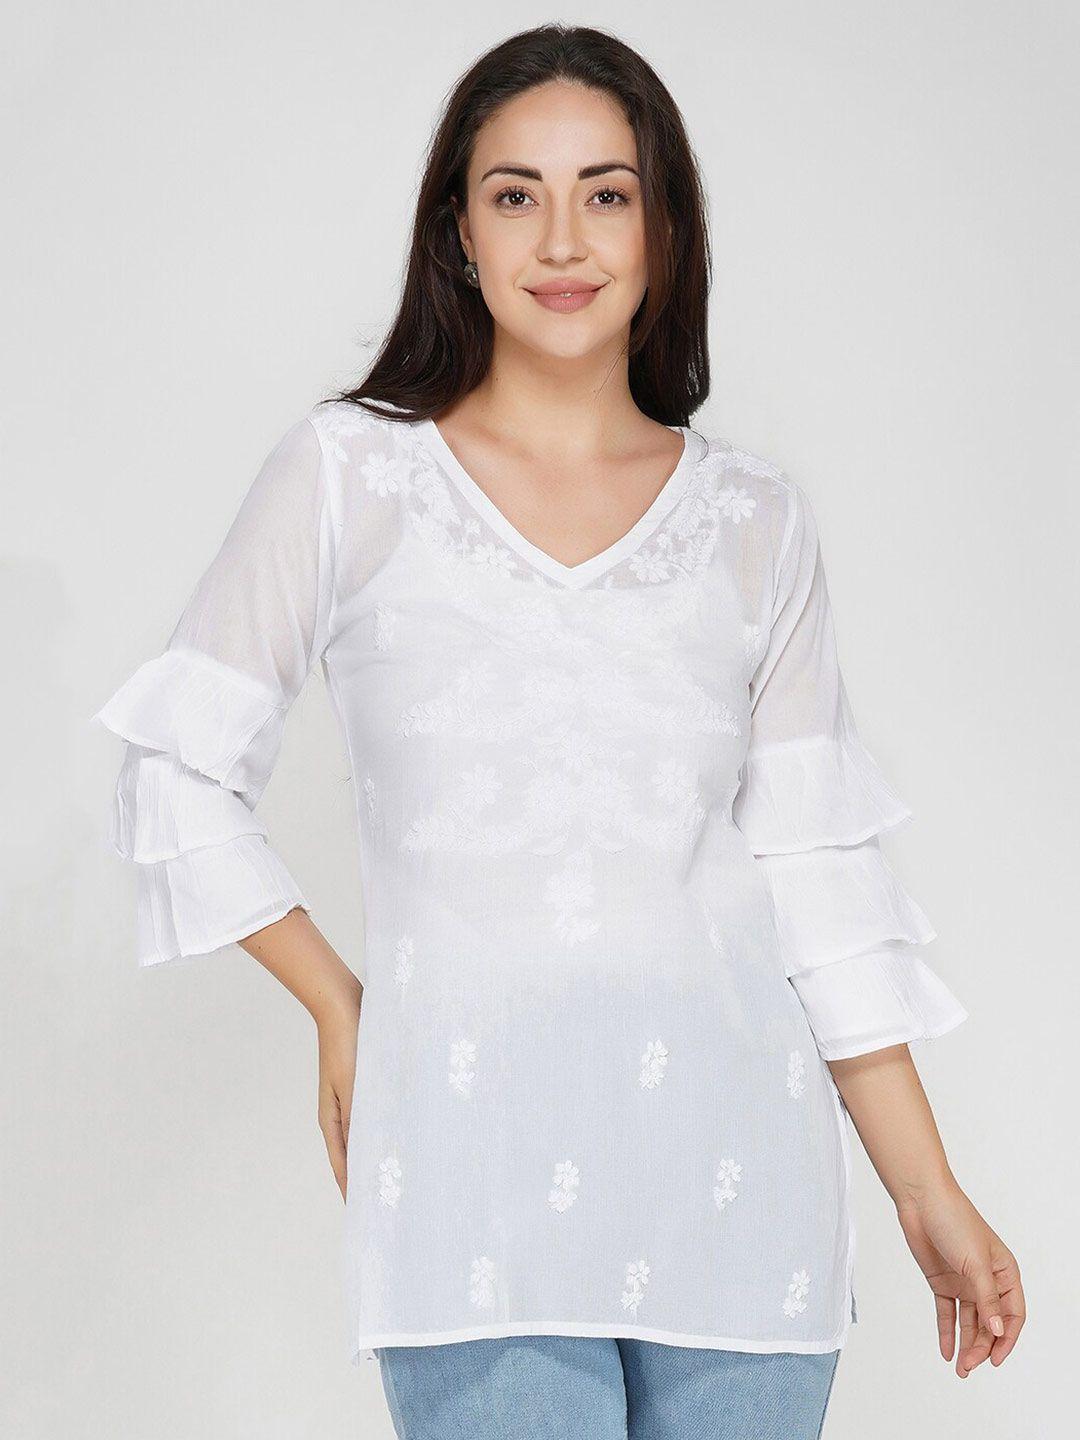 vahson women white embriodered pure cotton top